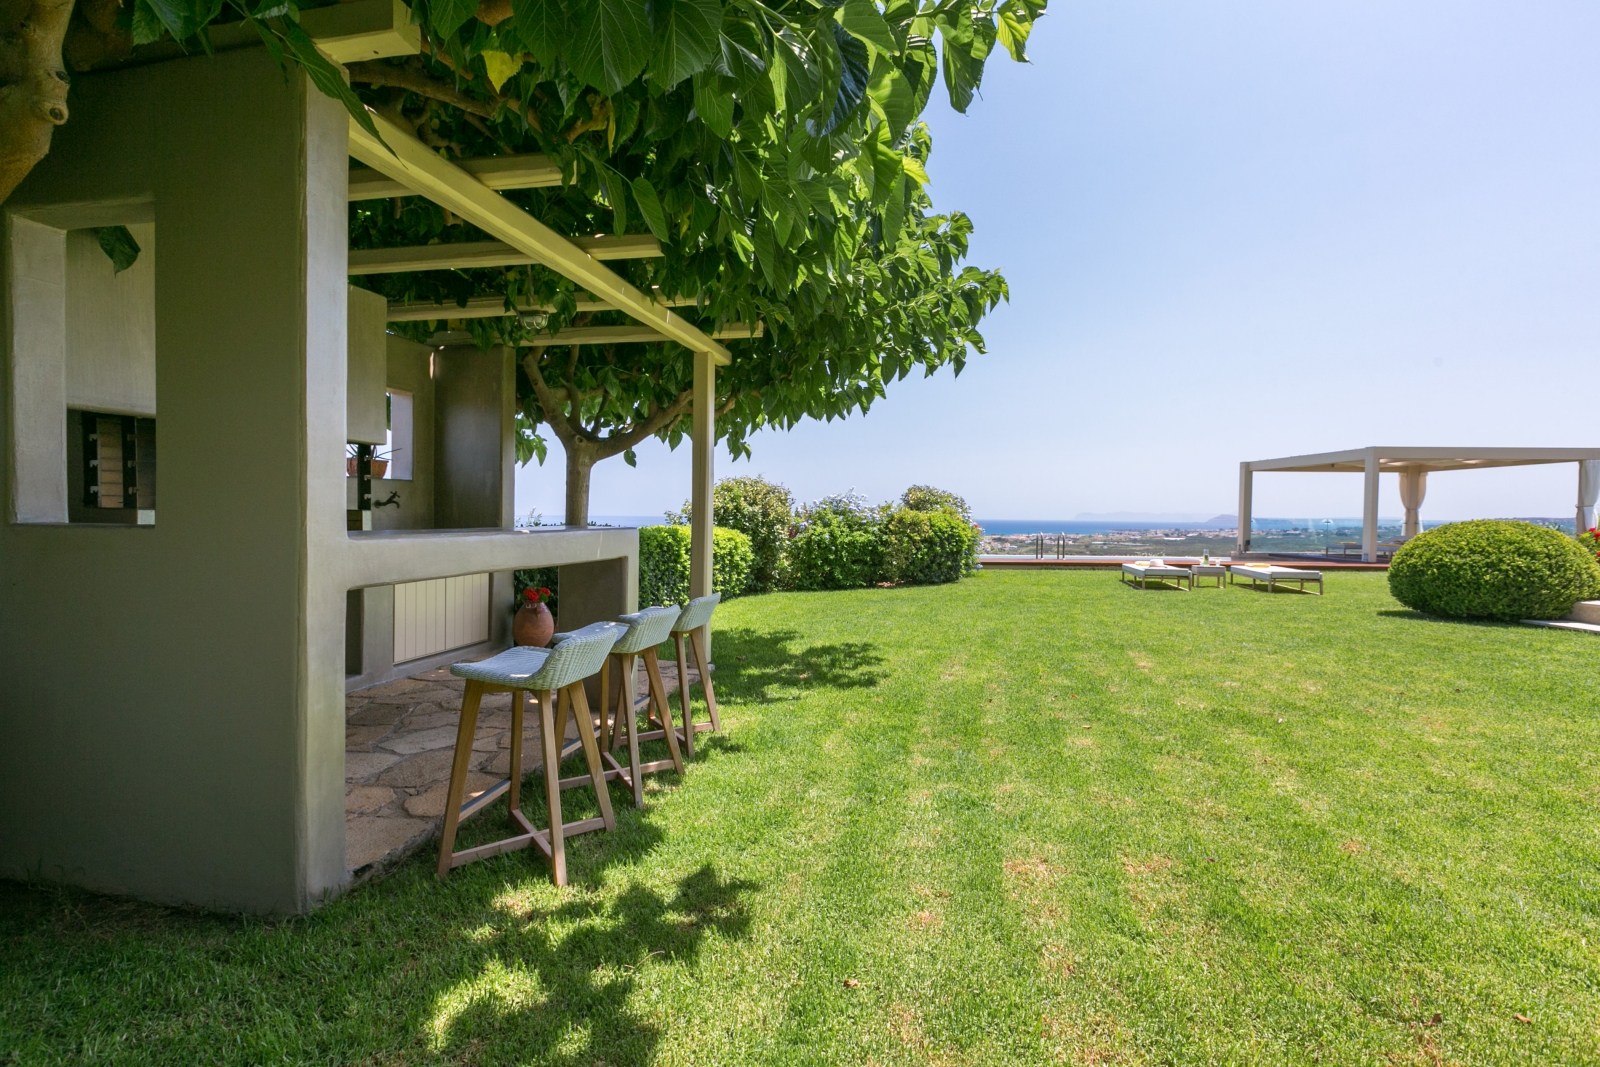 Garden with grass, hedges, trees, bar and kitchen area, pool, pergola and sea view at Villa Filira on Crete, Greece